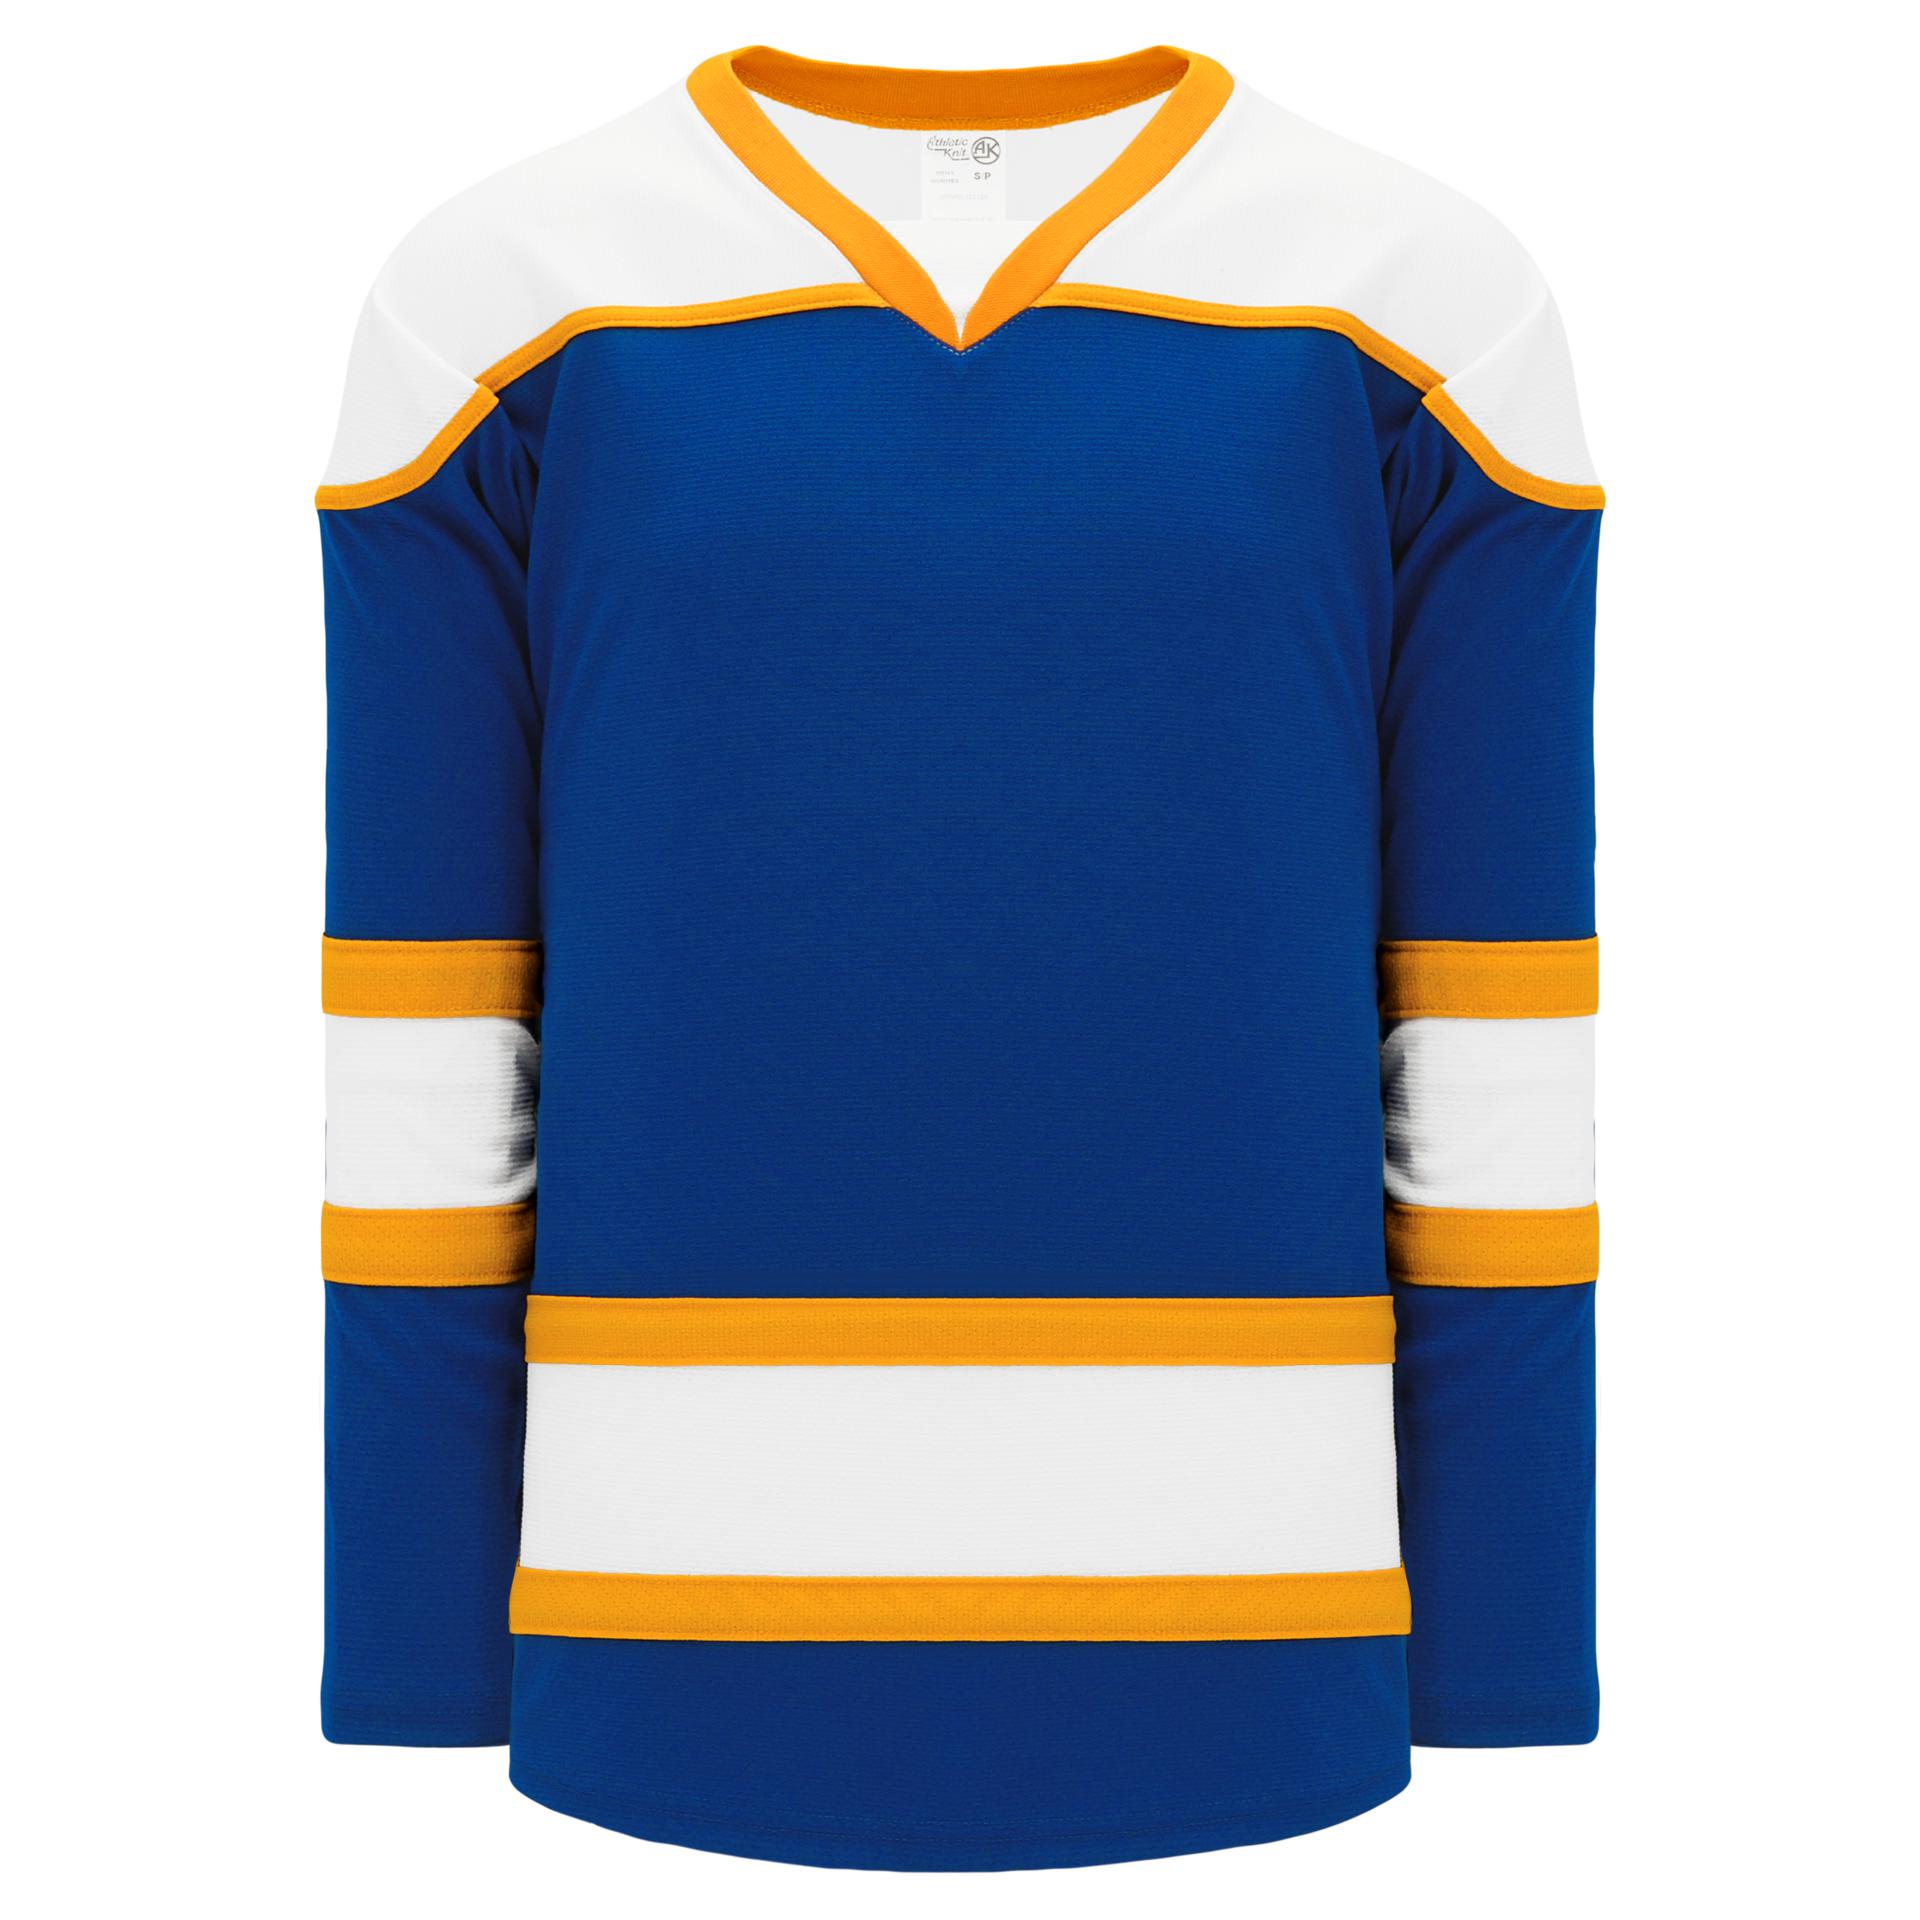 blue and yellow jerseys